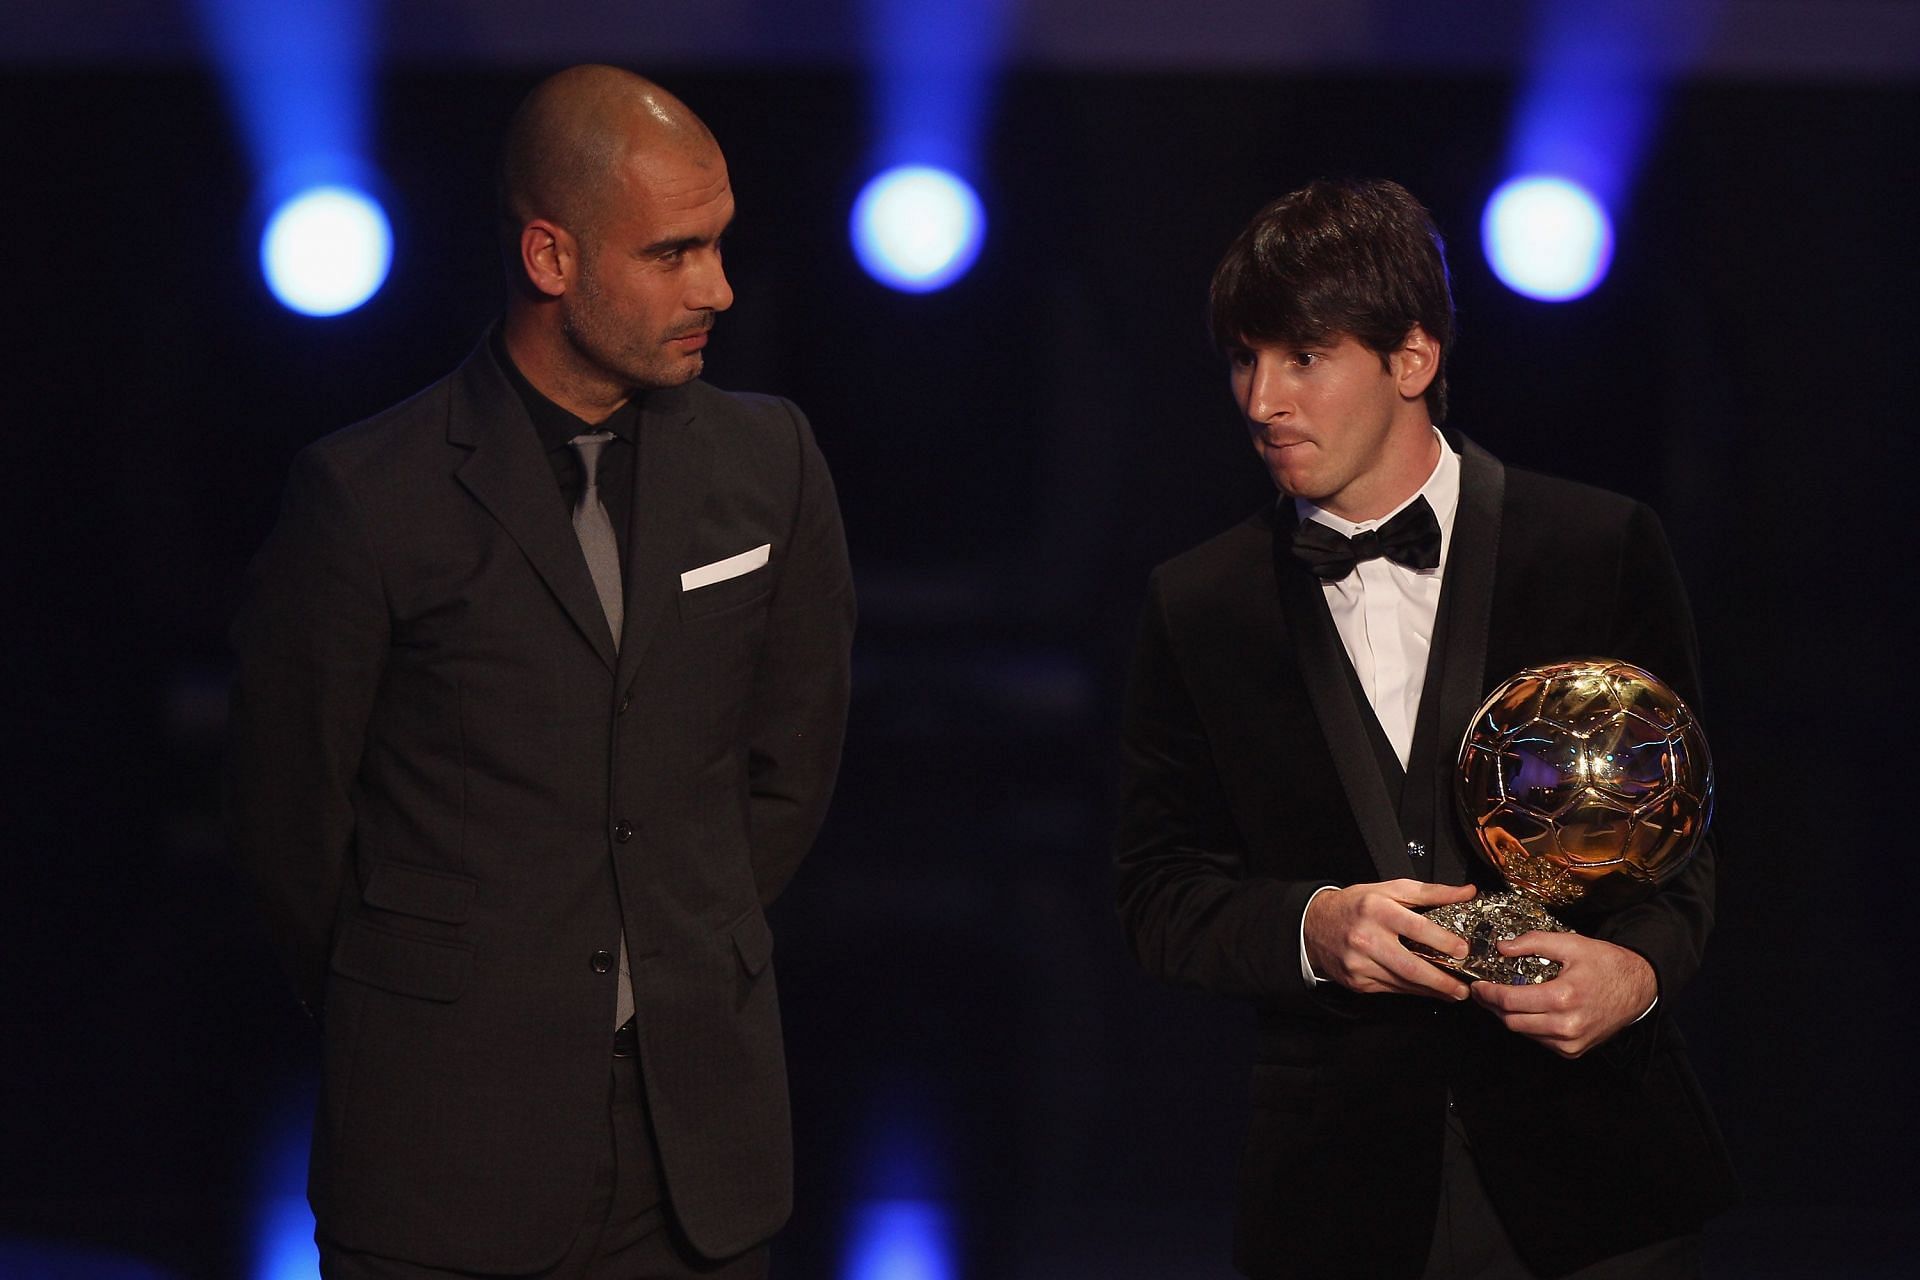 Lionel Messi (right) scored a lot of goals under Pep Guardiola (left).